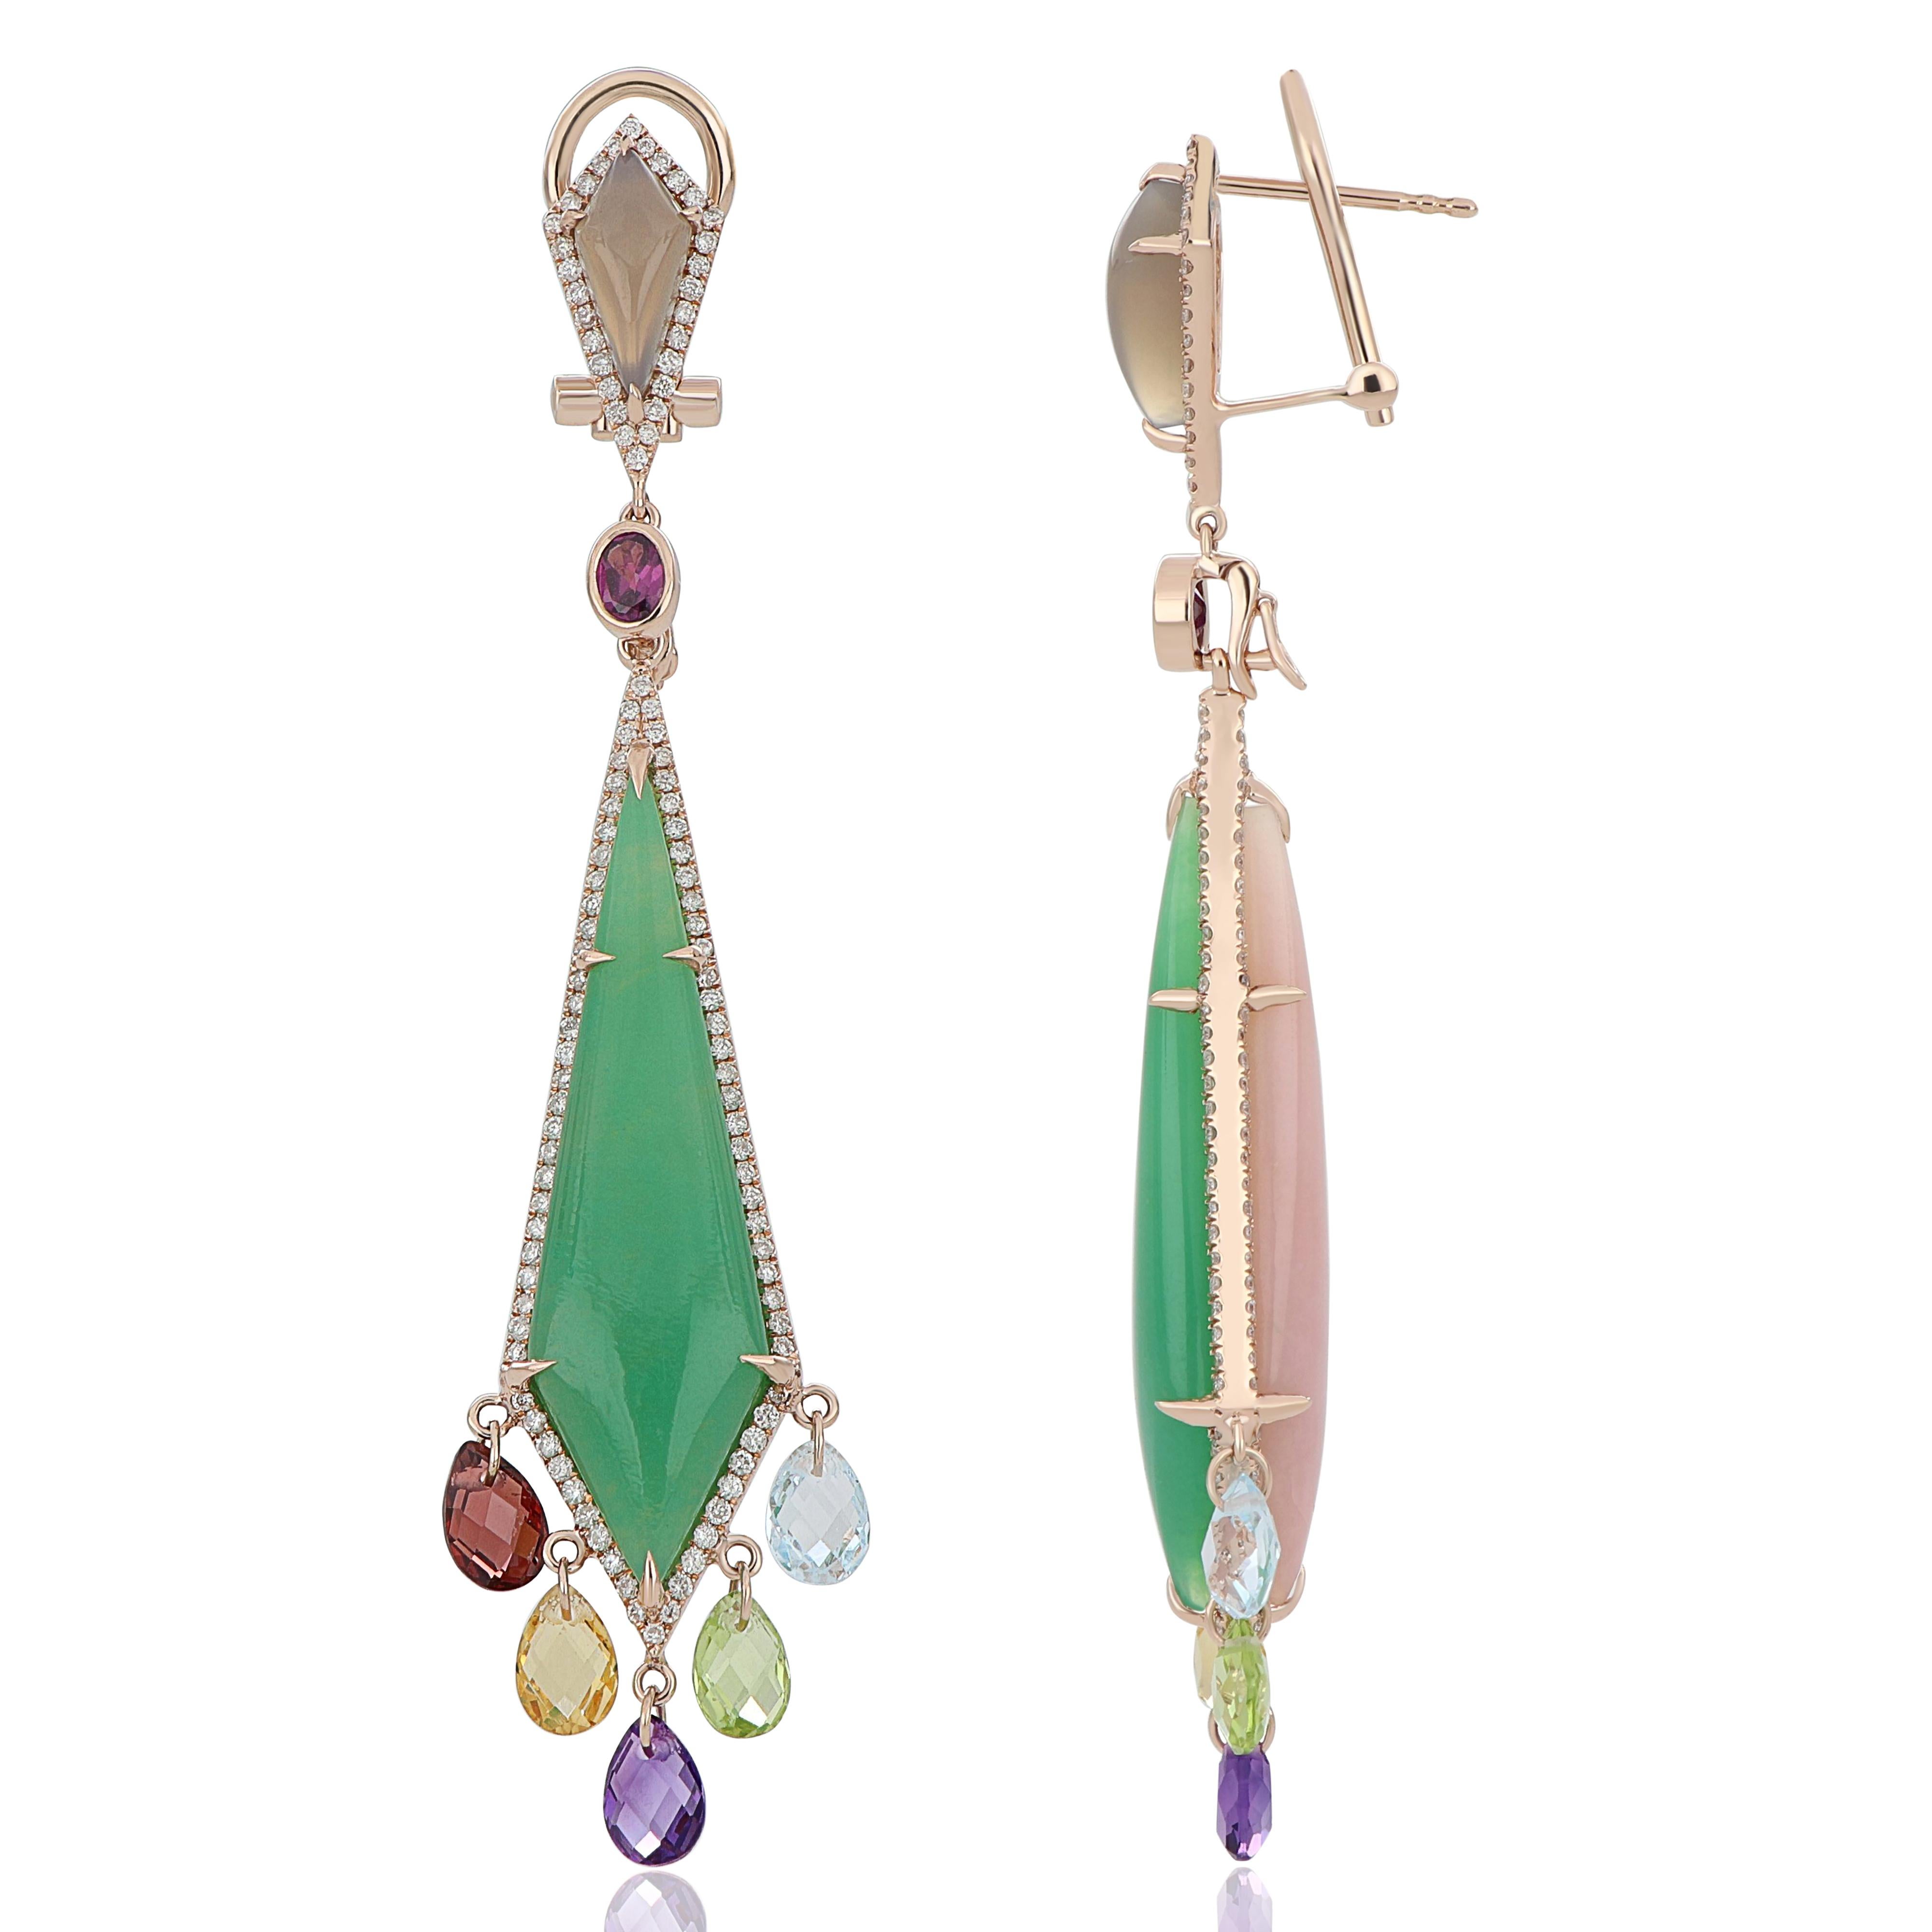 Elegant and exquisitely detailed 14 Karat Yellow Gold Earrings, adorned with Cabochon Kite Shaped  Fancy 12.65 Cts. Chrysoprase on the front side & 10. 54 Cts. Kite Shaped Fancy Pink Opal  on the back with micro pave set Diamonds weighing approx.